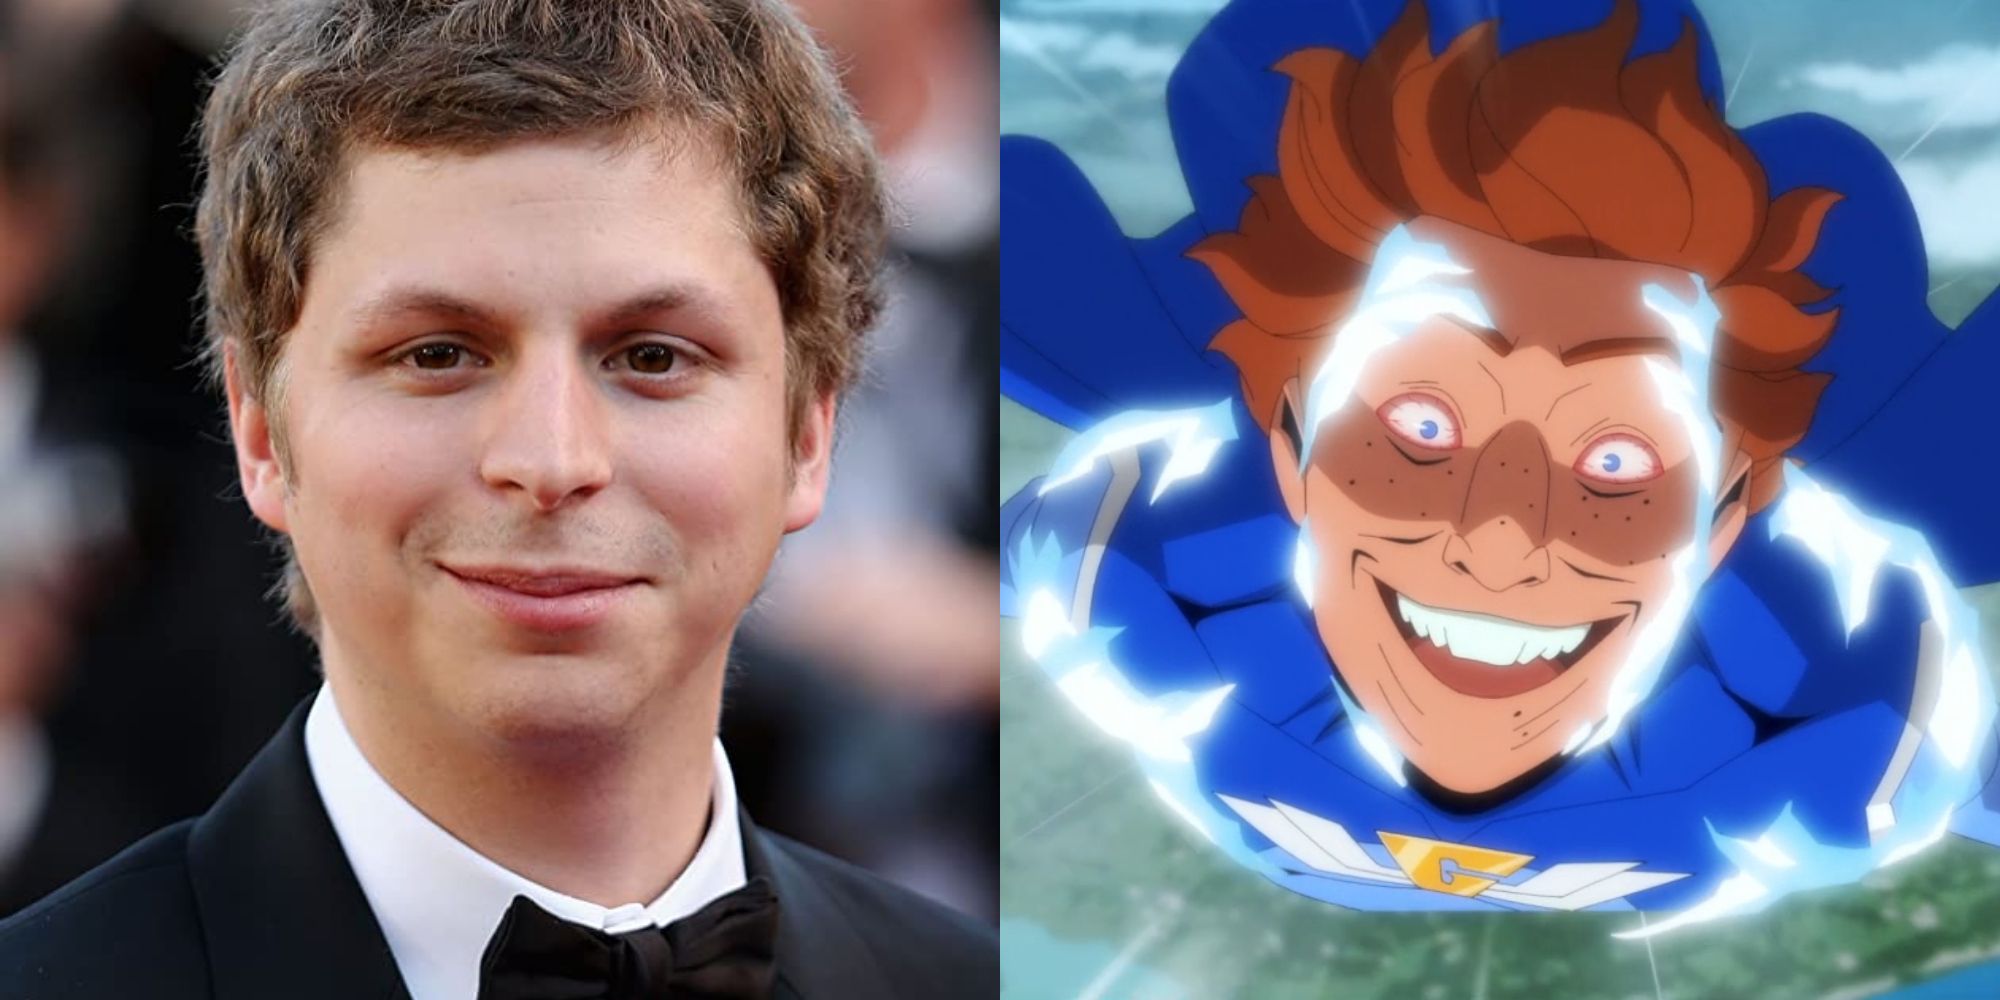 Michael Cera as the Great Wide Wonder